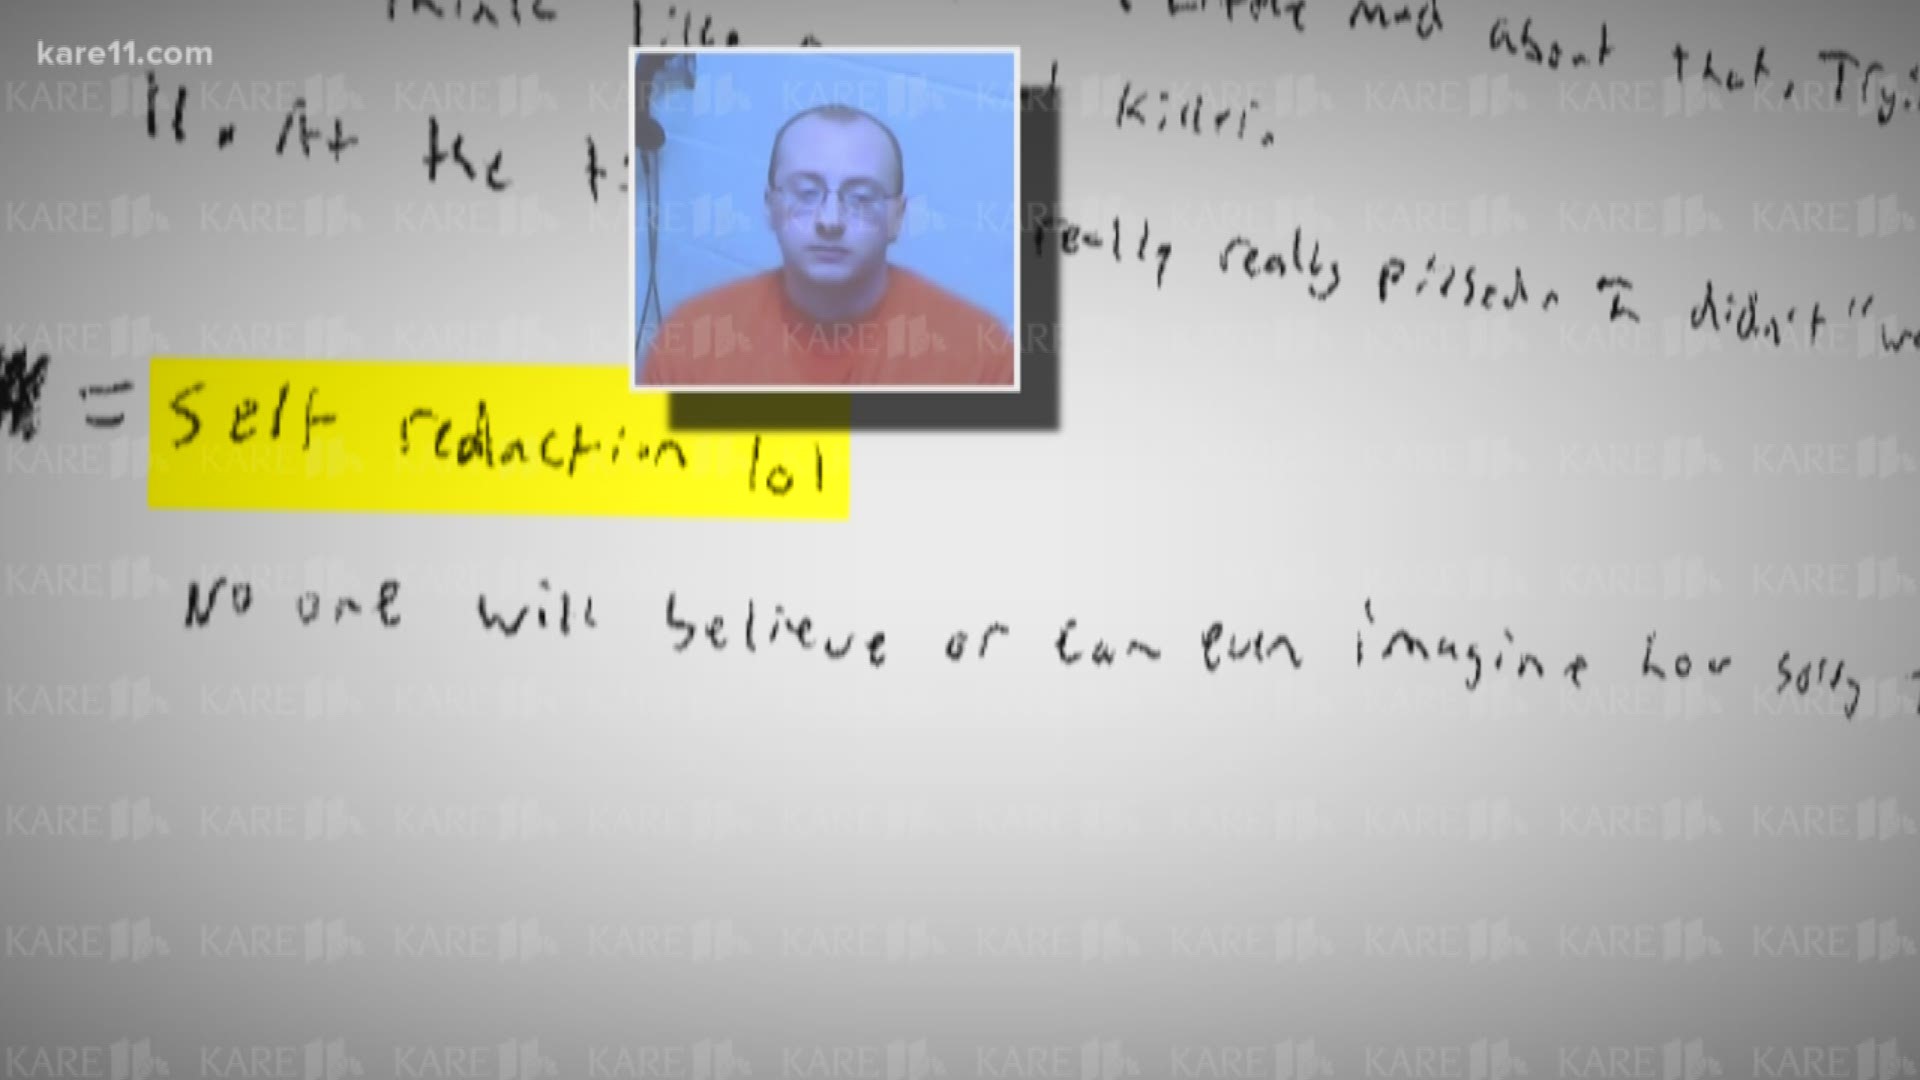 Jake Patterson says he will plead guilty in a letter written to KARE 11 reporter Lou Raguse.